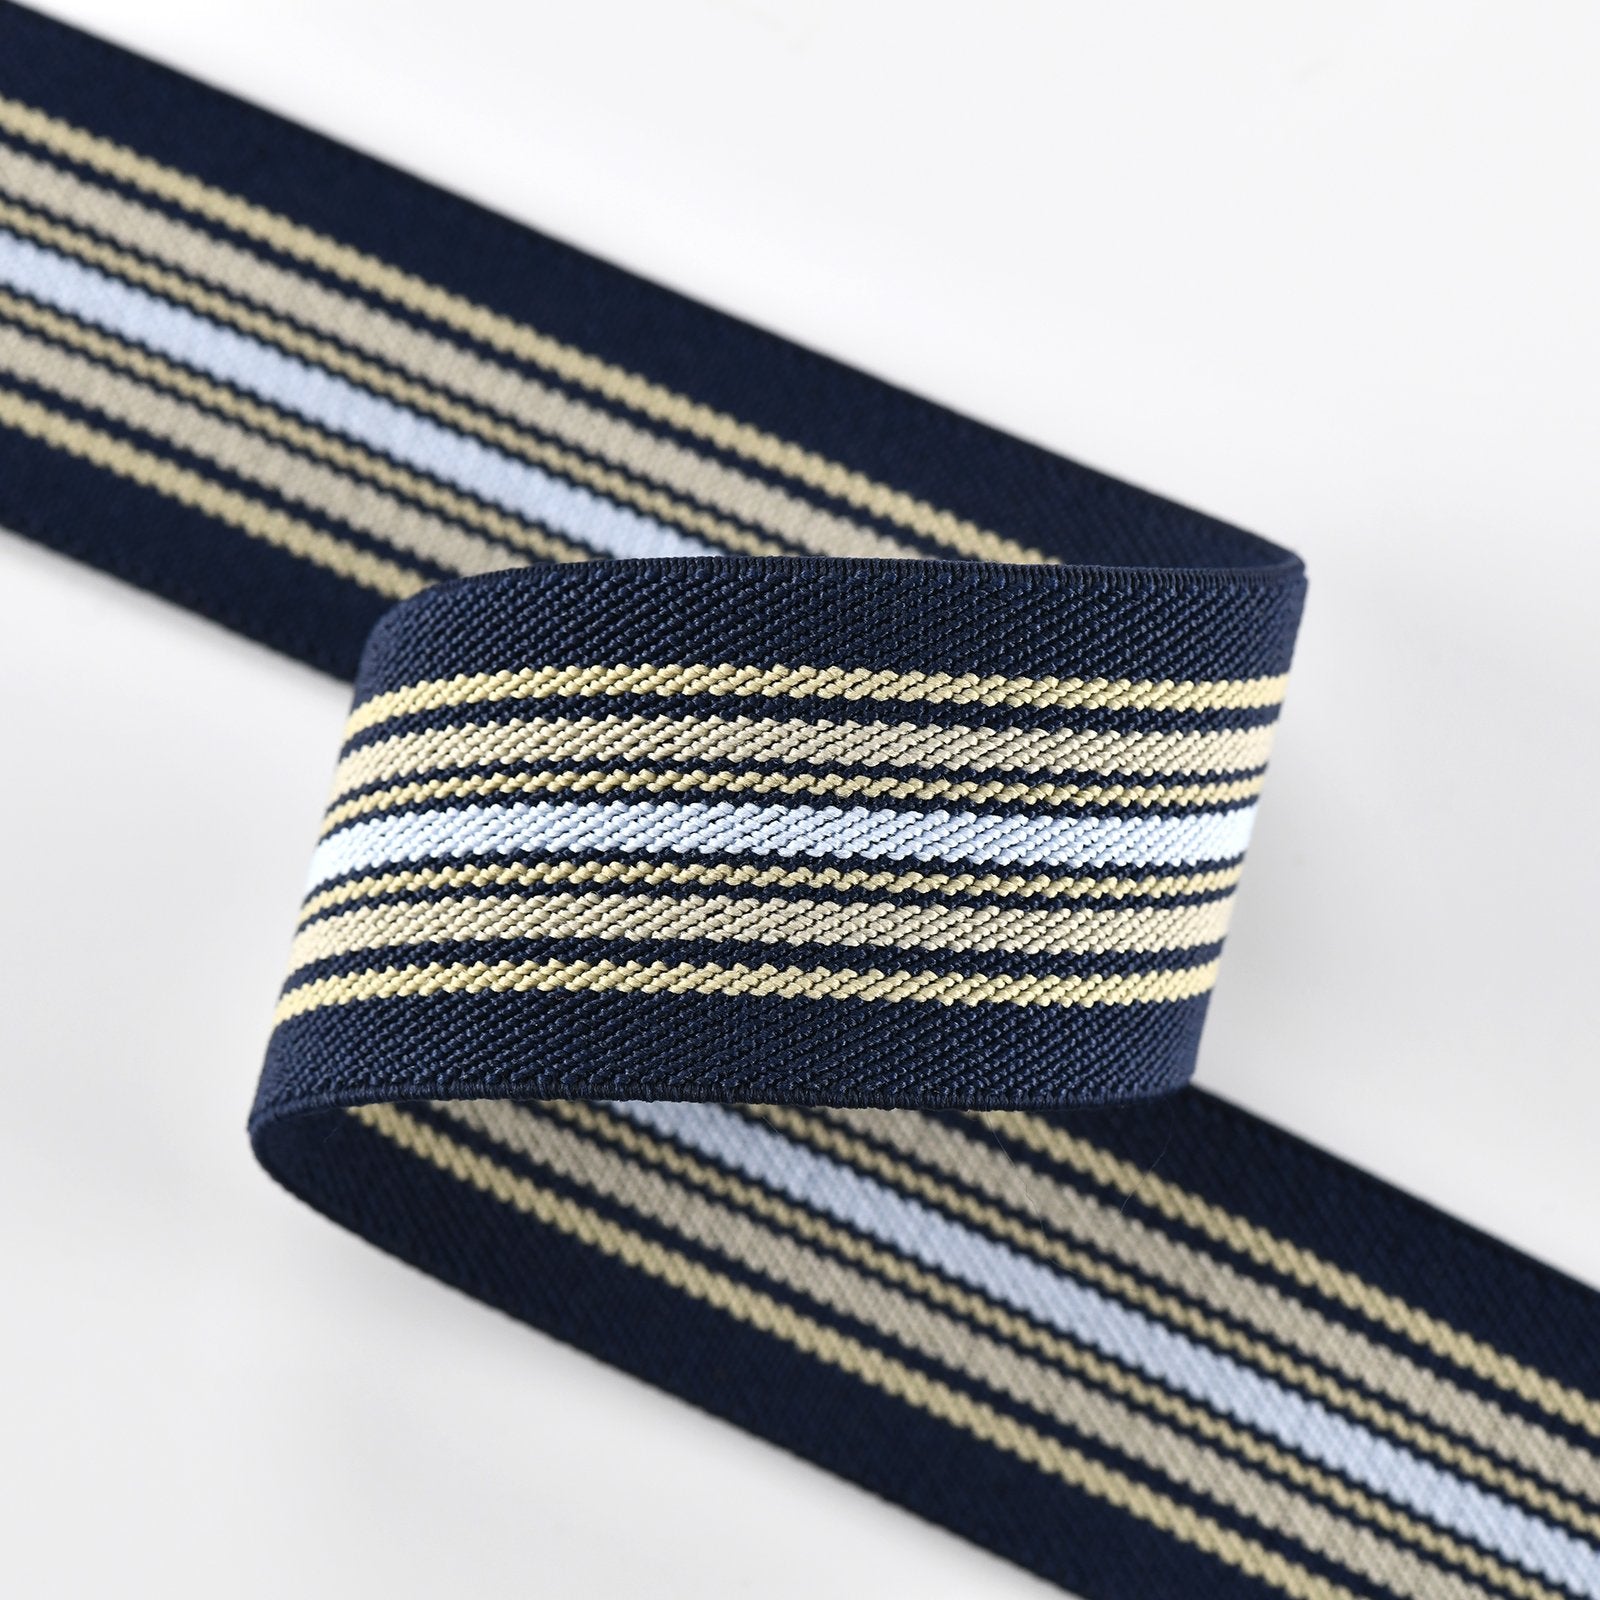 1.5'' 40mm wide Double-sided Navy and Beige and Light Blue Stripes twill elastic band- 1 yard